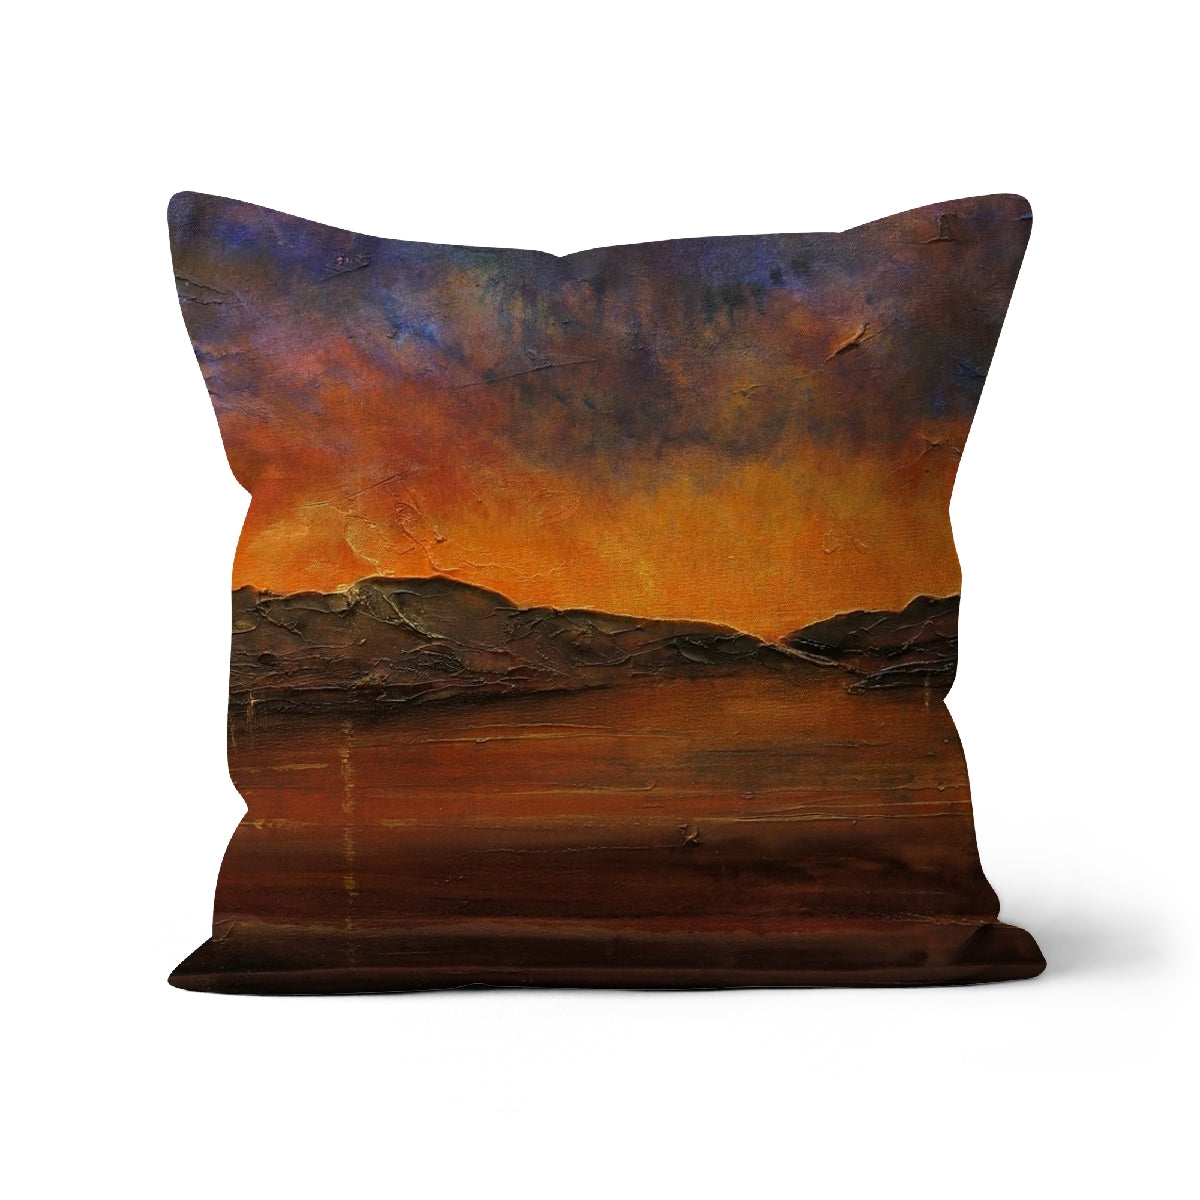 A Brooding Clyde Dusk Art Gifts Cushion-Cushions-River Clyde Art Gallery-Linen-12"x12"-Paintings, Prints, Homeware, Art Gifts From Scotland By Scottish Artist Kevin Hunter